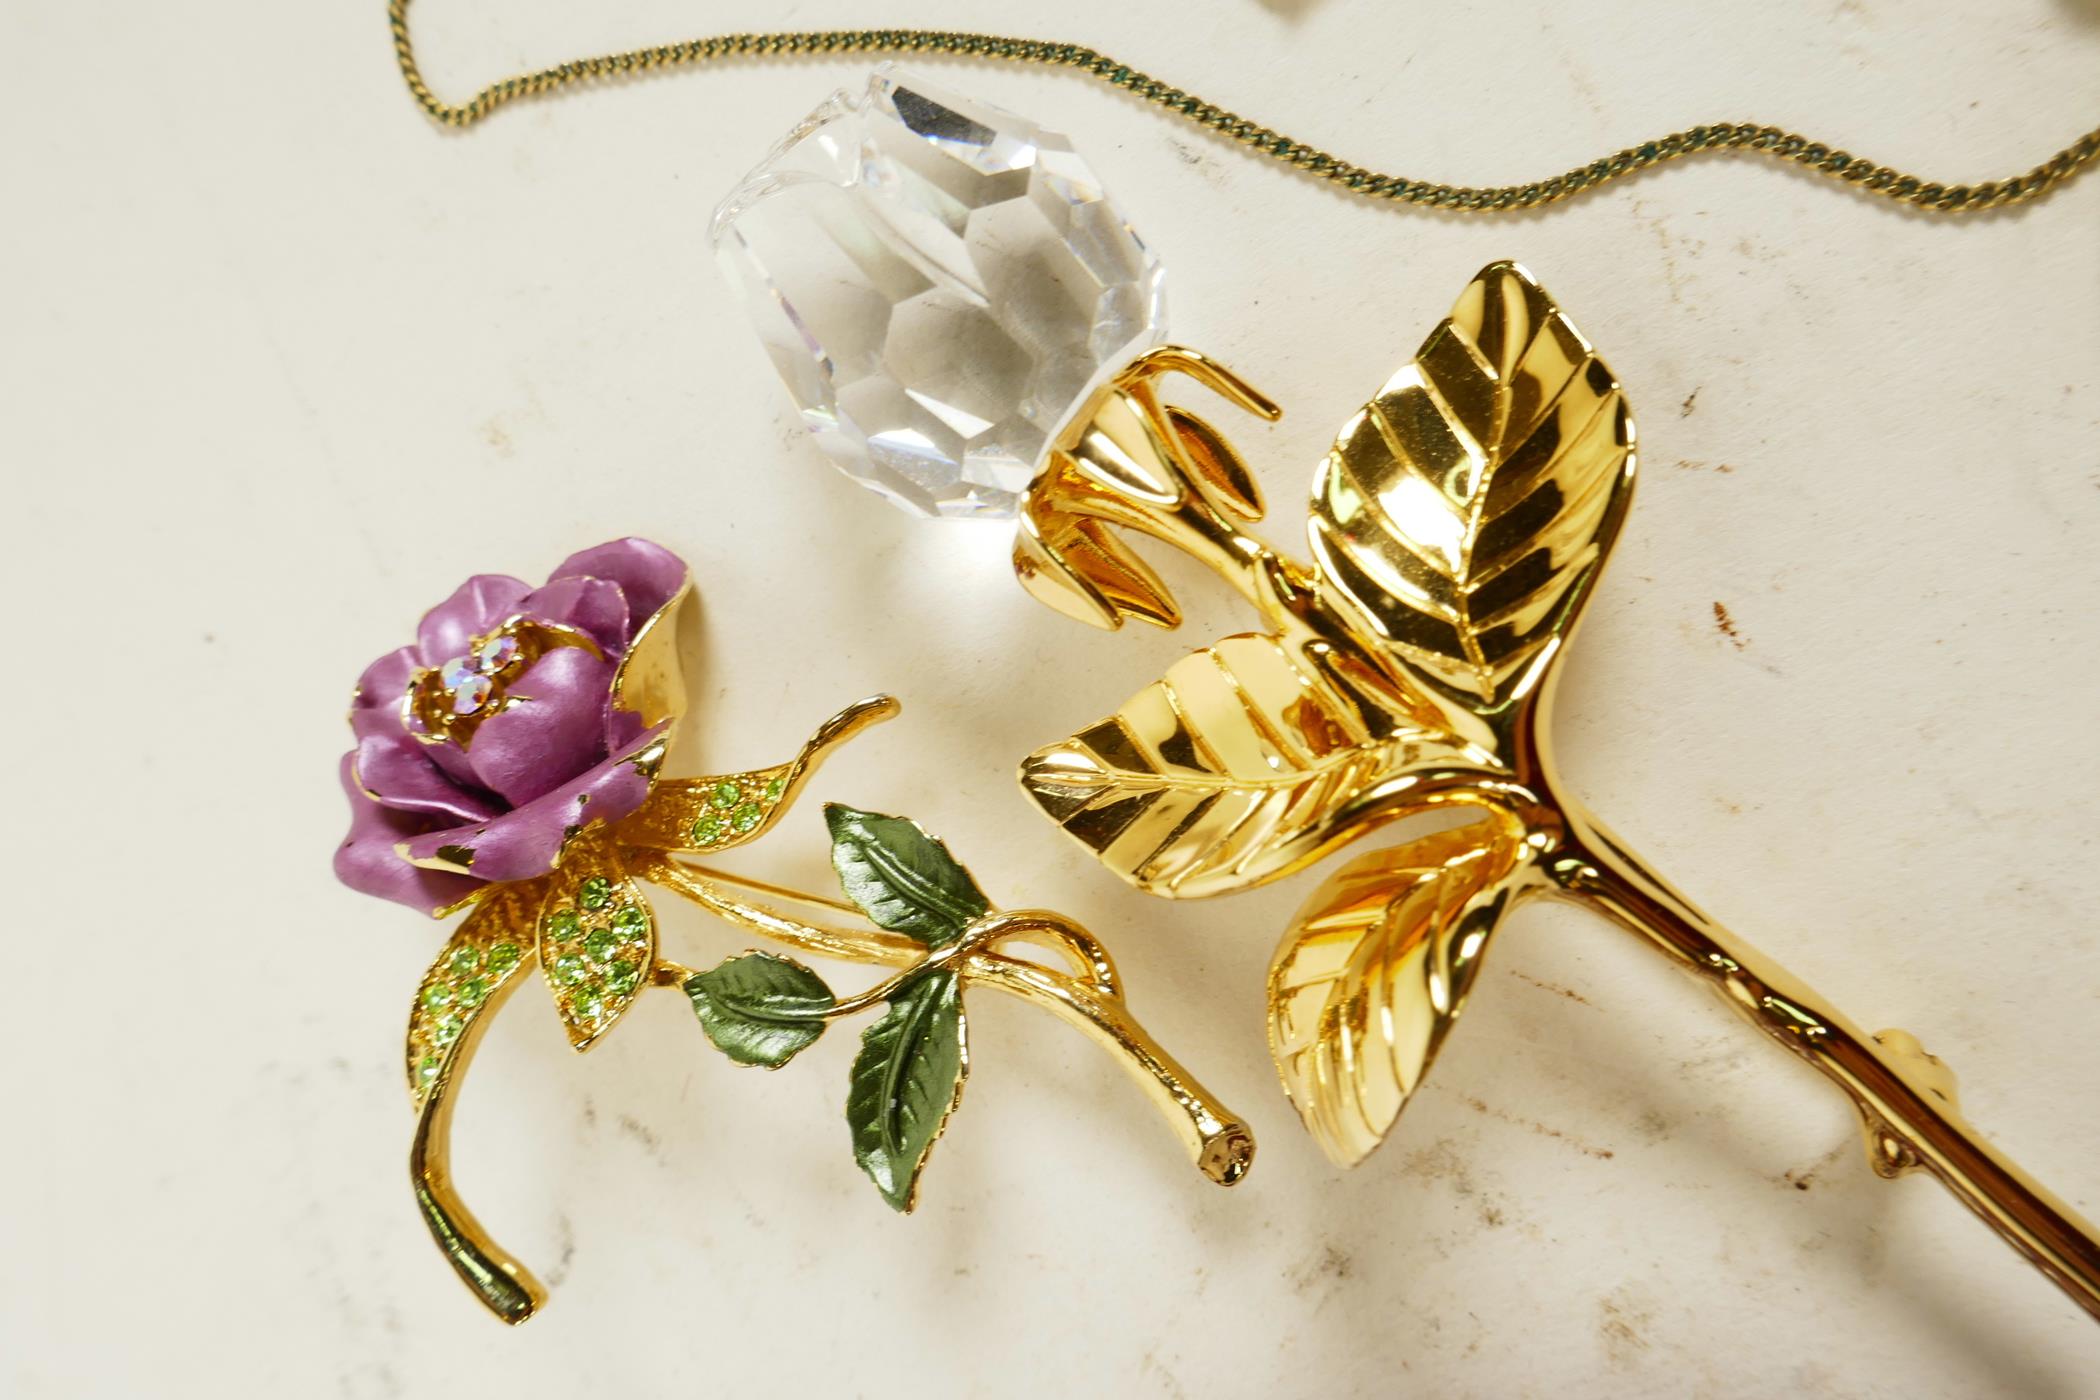 Two Swarovski 'Rose' crystal and gilt flower brooches, a Swarovski pendant, and a micro-mosaic - Image 3 of 5